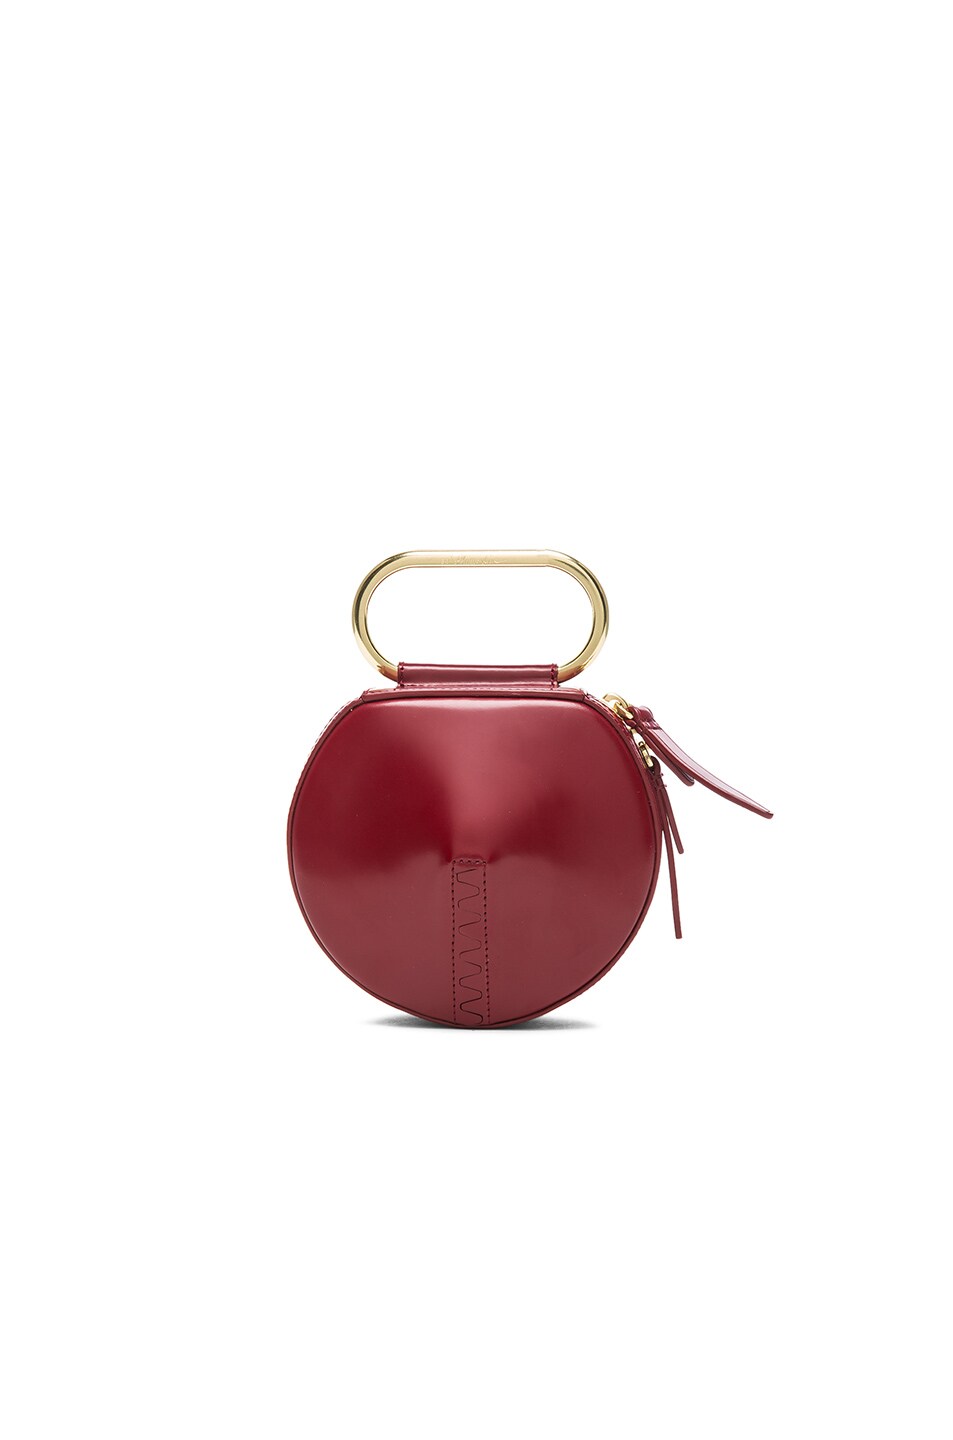 Image 1 of 3.1 phillip lim Alix Circle Clutch in Cardinal